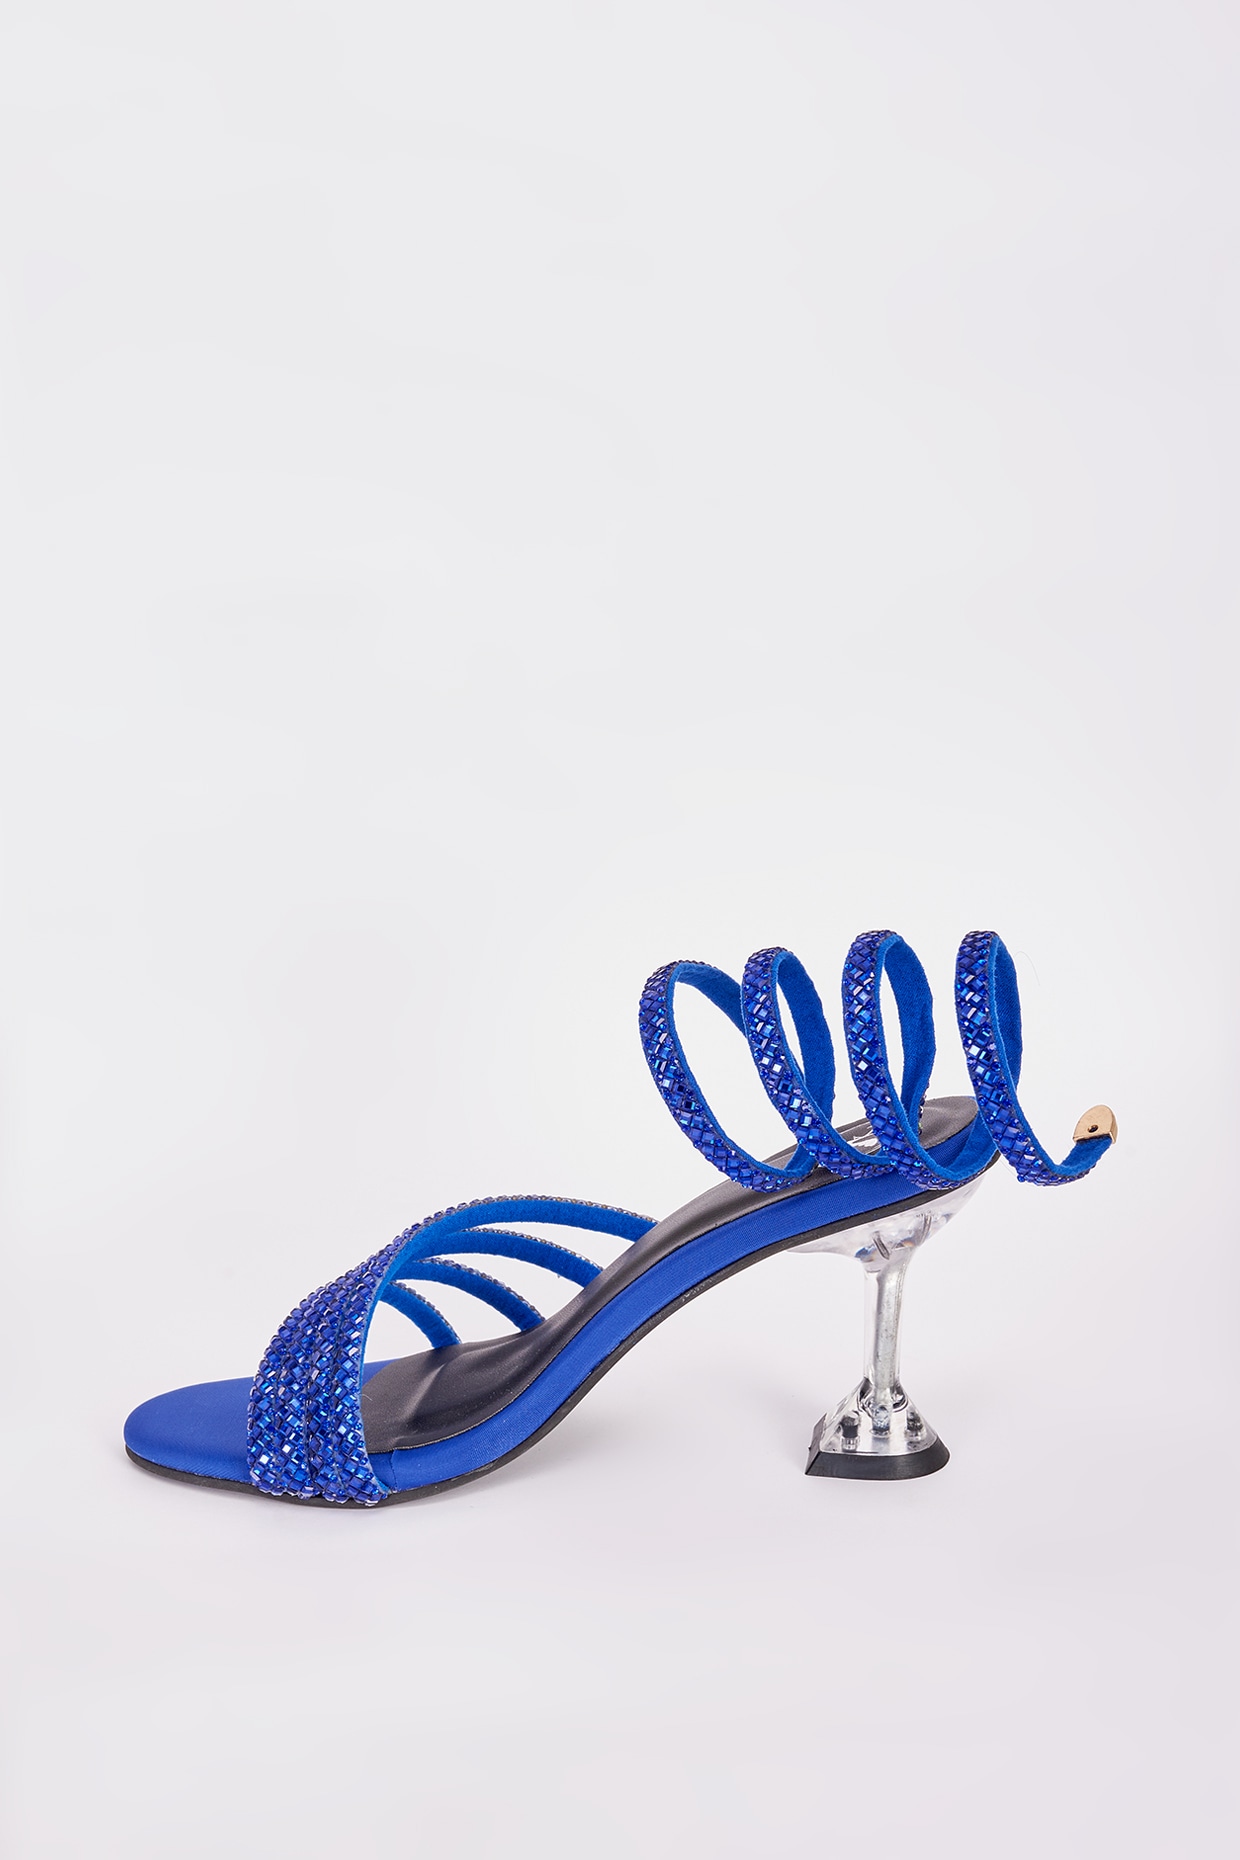 Royal Blue Rhinestone Sandals Thin High Heels Pointed Toe Sandals Blue  Crystal Heels Shoes Fashion High Heel Shoes (Gold, numeric_8) : Buy Online  at Best Price in KSA - Souq is now